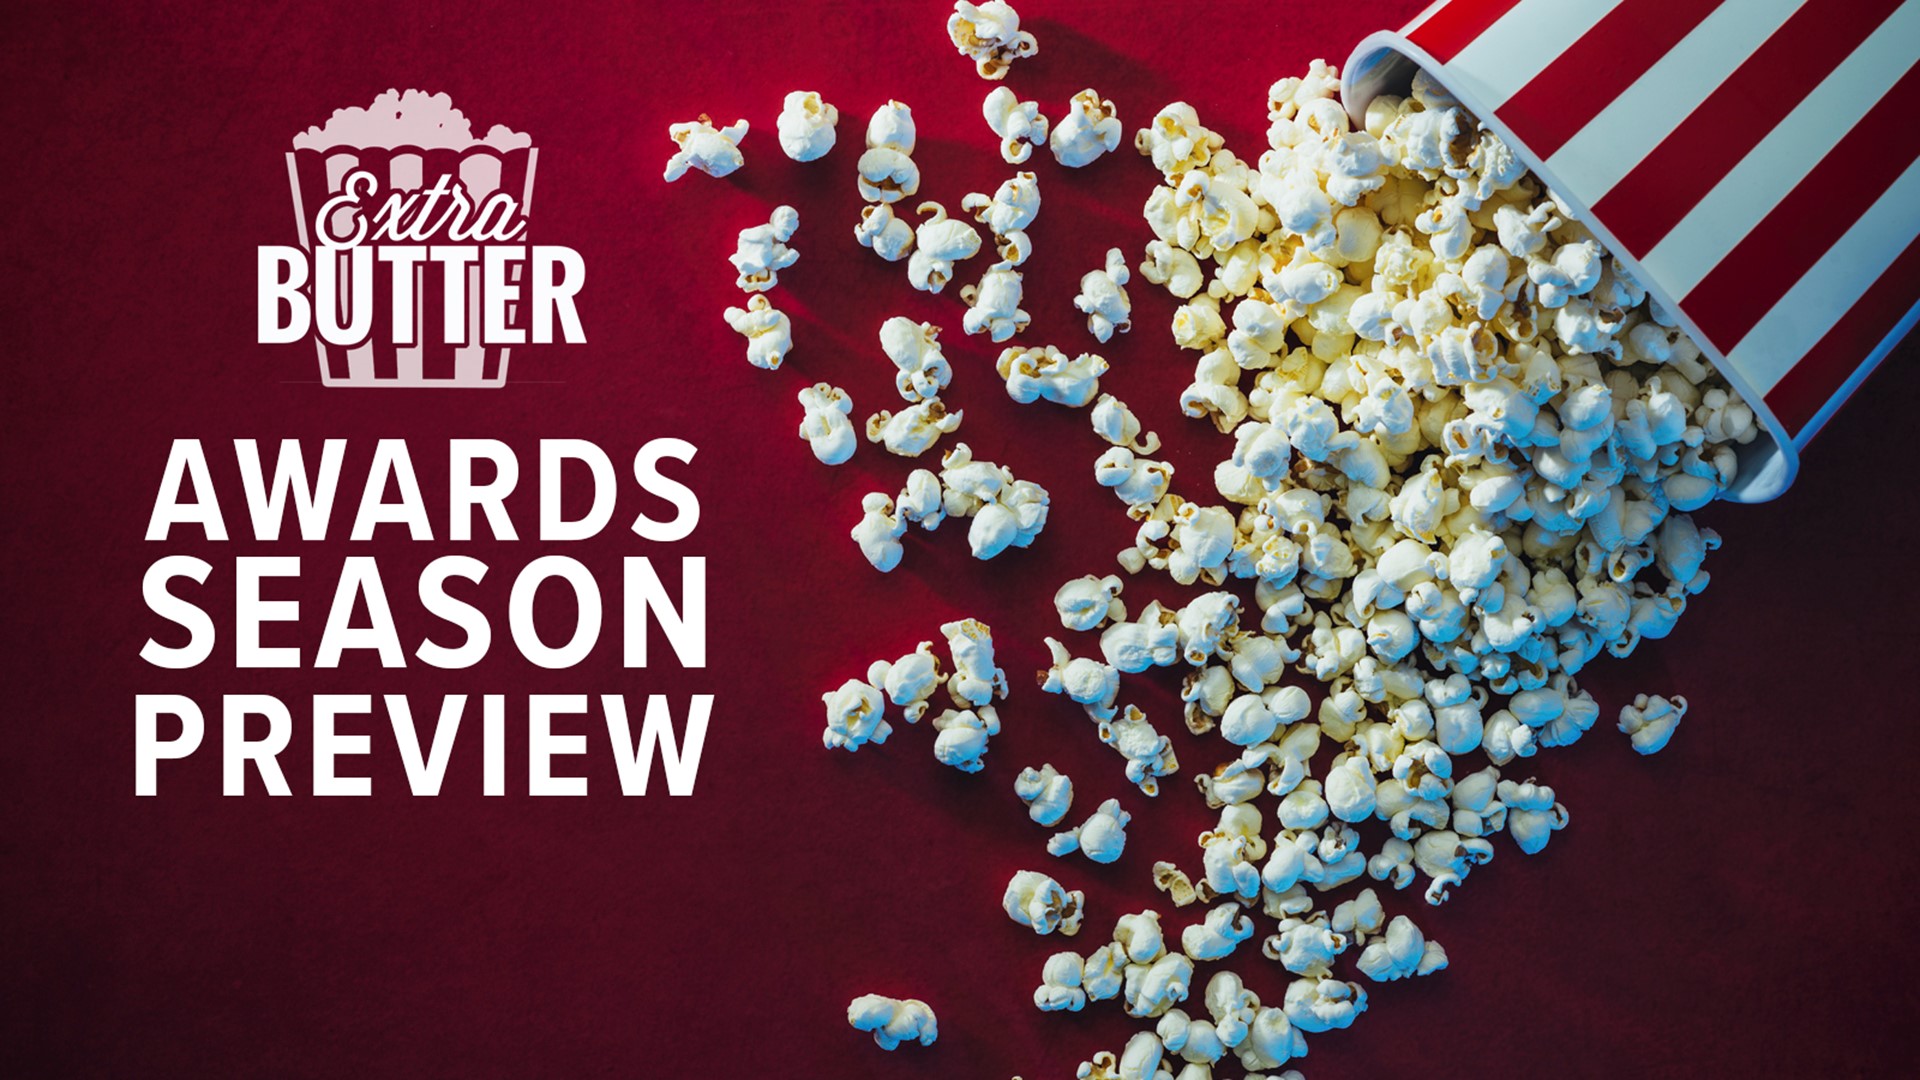 Extra Butter previews the Golden Globes, Oscar, Critics Choice, SAG, and other awards shows. What are the chances for blockbuster movies like "A Star is Born," "Bohemian Rhapsody," "Black Panther," and "Incredibles 2?" Mark S. Allen talks with Bradley Cooper about Lady Gaga, Rami Malek, Chadwick Boseman, Ryan Coogler, Lupita Nyong'o, Viola Davis, Melissa McCarthy, John C. Reilly and Holly Hunter. Extra Butter Episode 110. Watch Extra Butter every Friday morning at 9:30 a.m. on ABC 10.